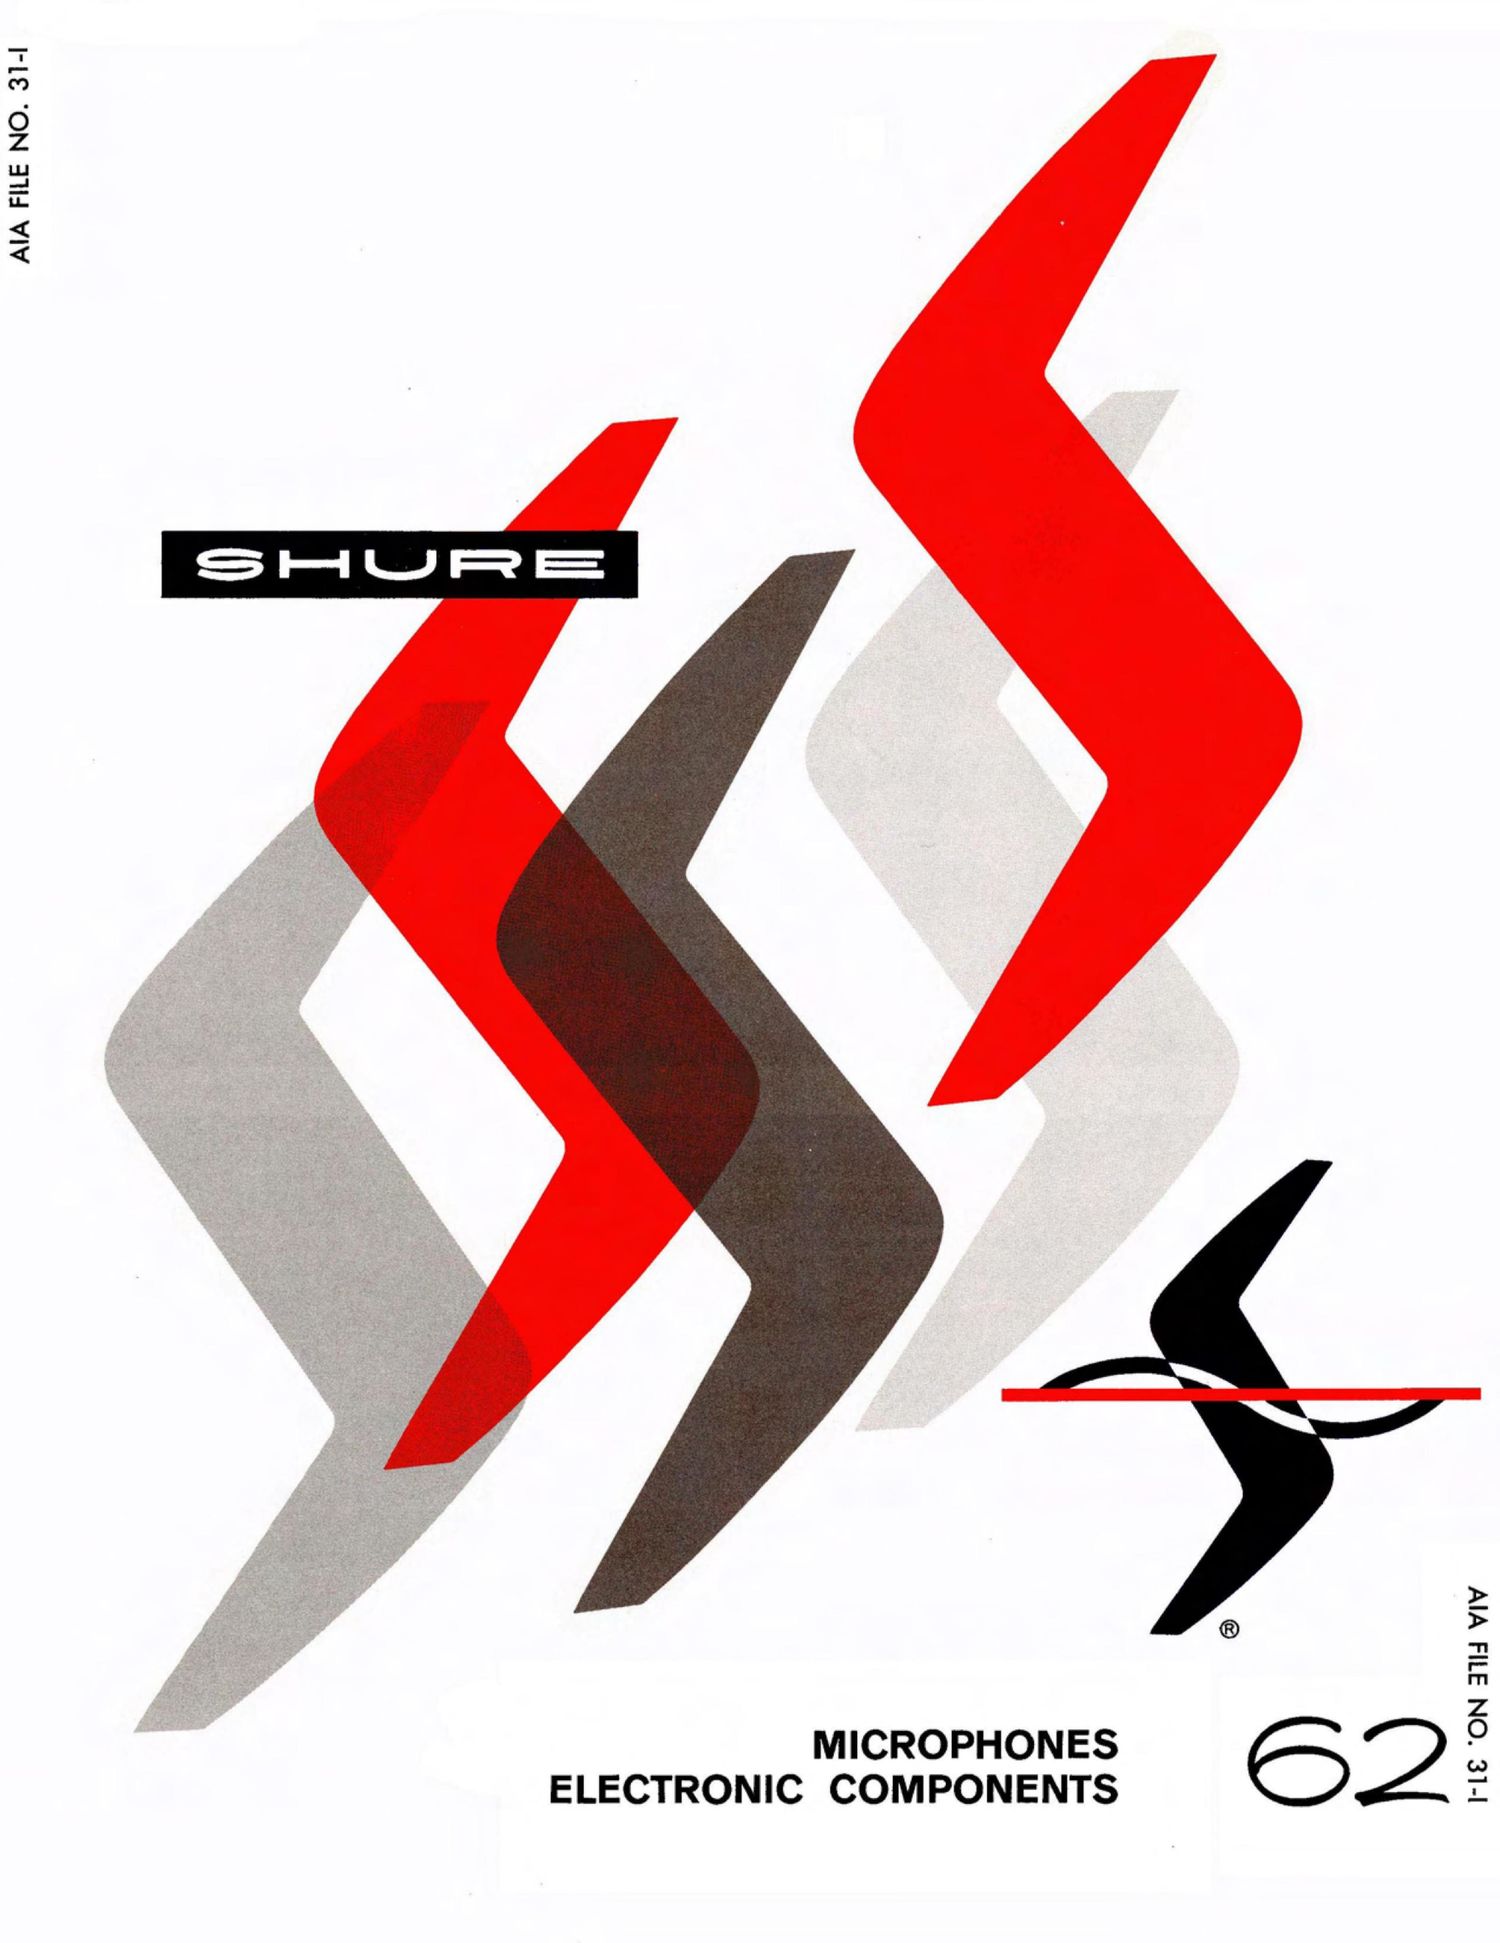 shure 1962 catalogue microphones electronic components